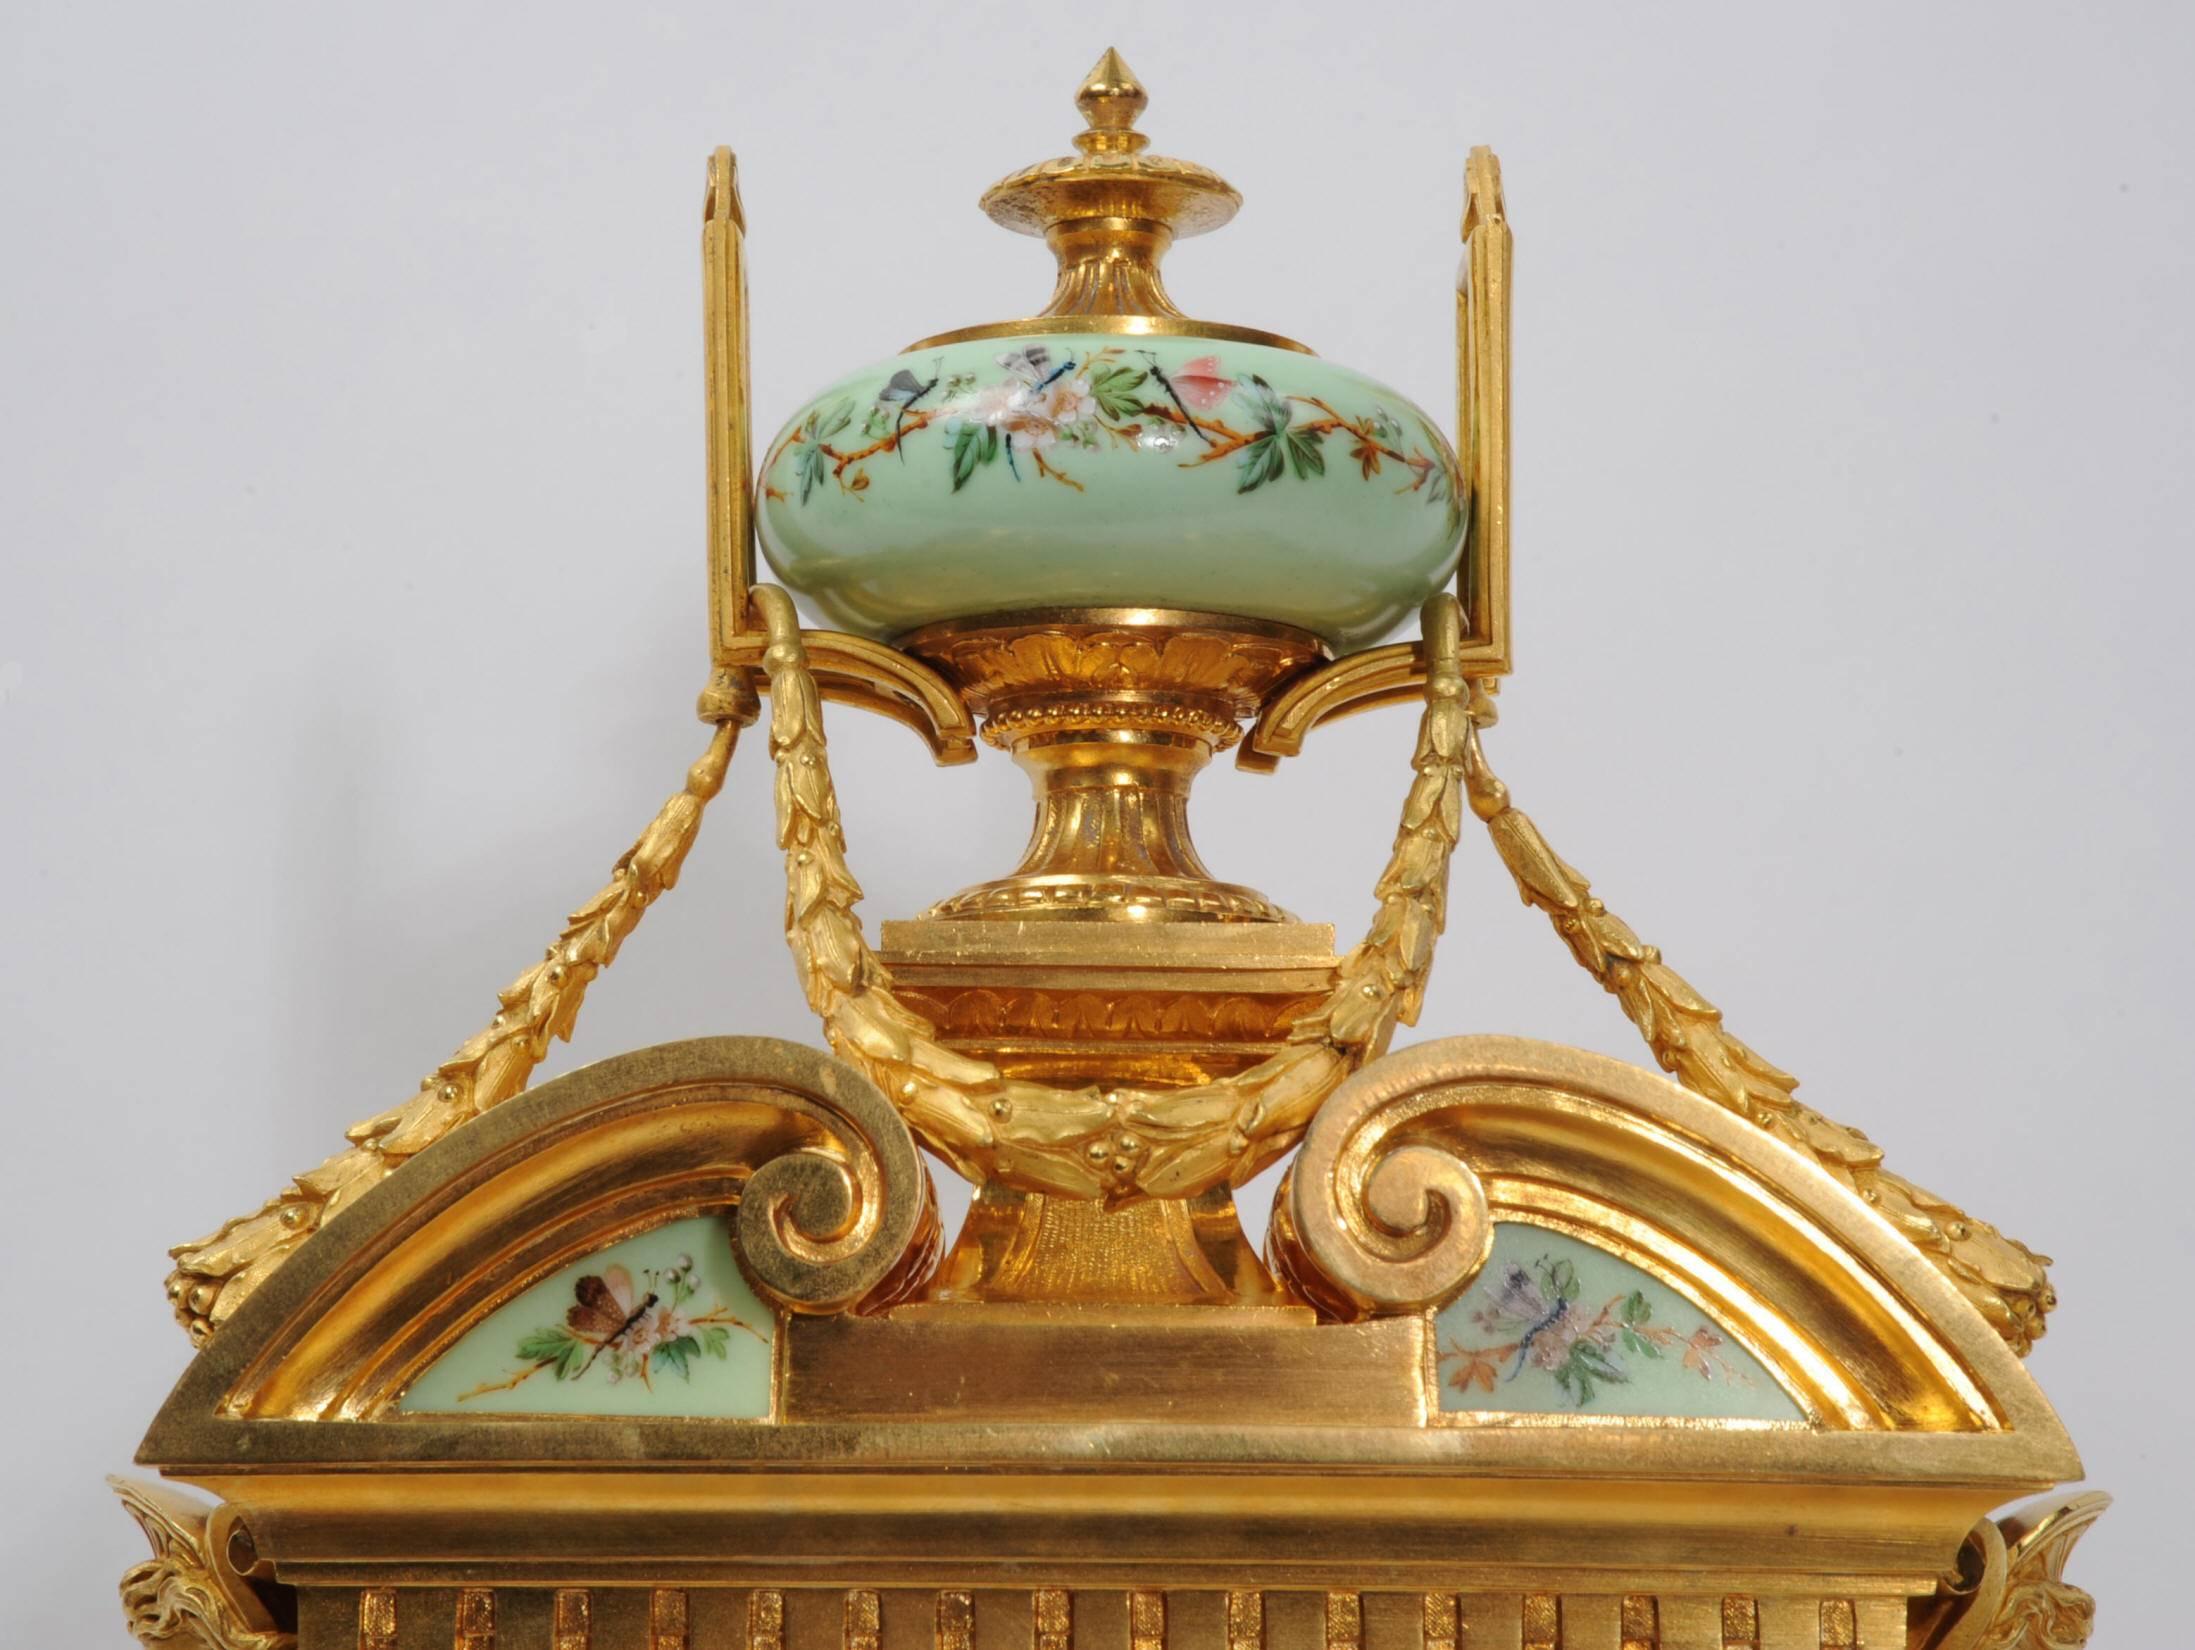 Neoclassical Large and Magnificent Ormolu and Sèvres Porcelain Clock by Achille Brocot